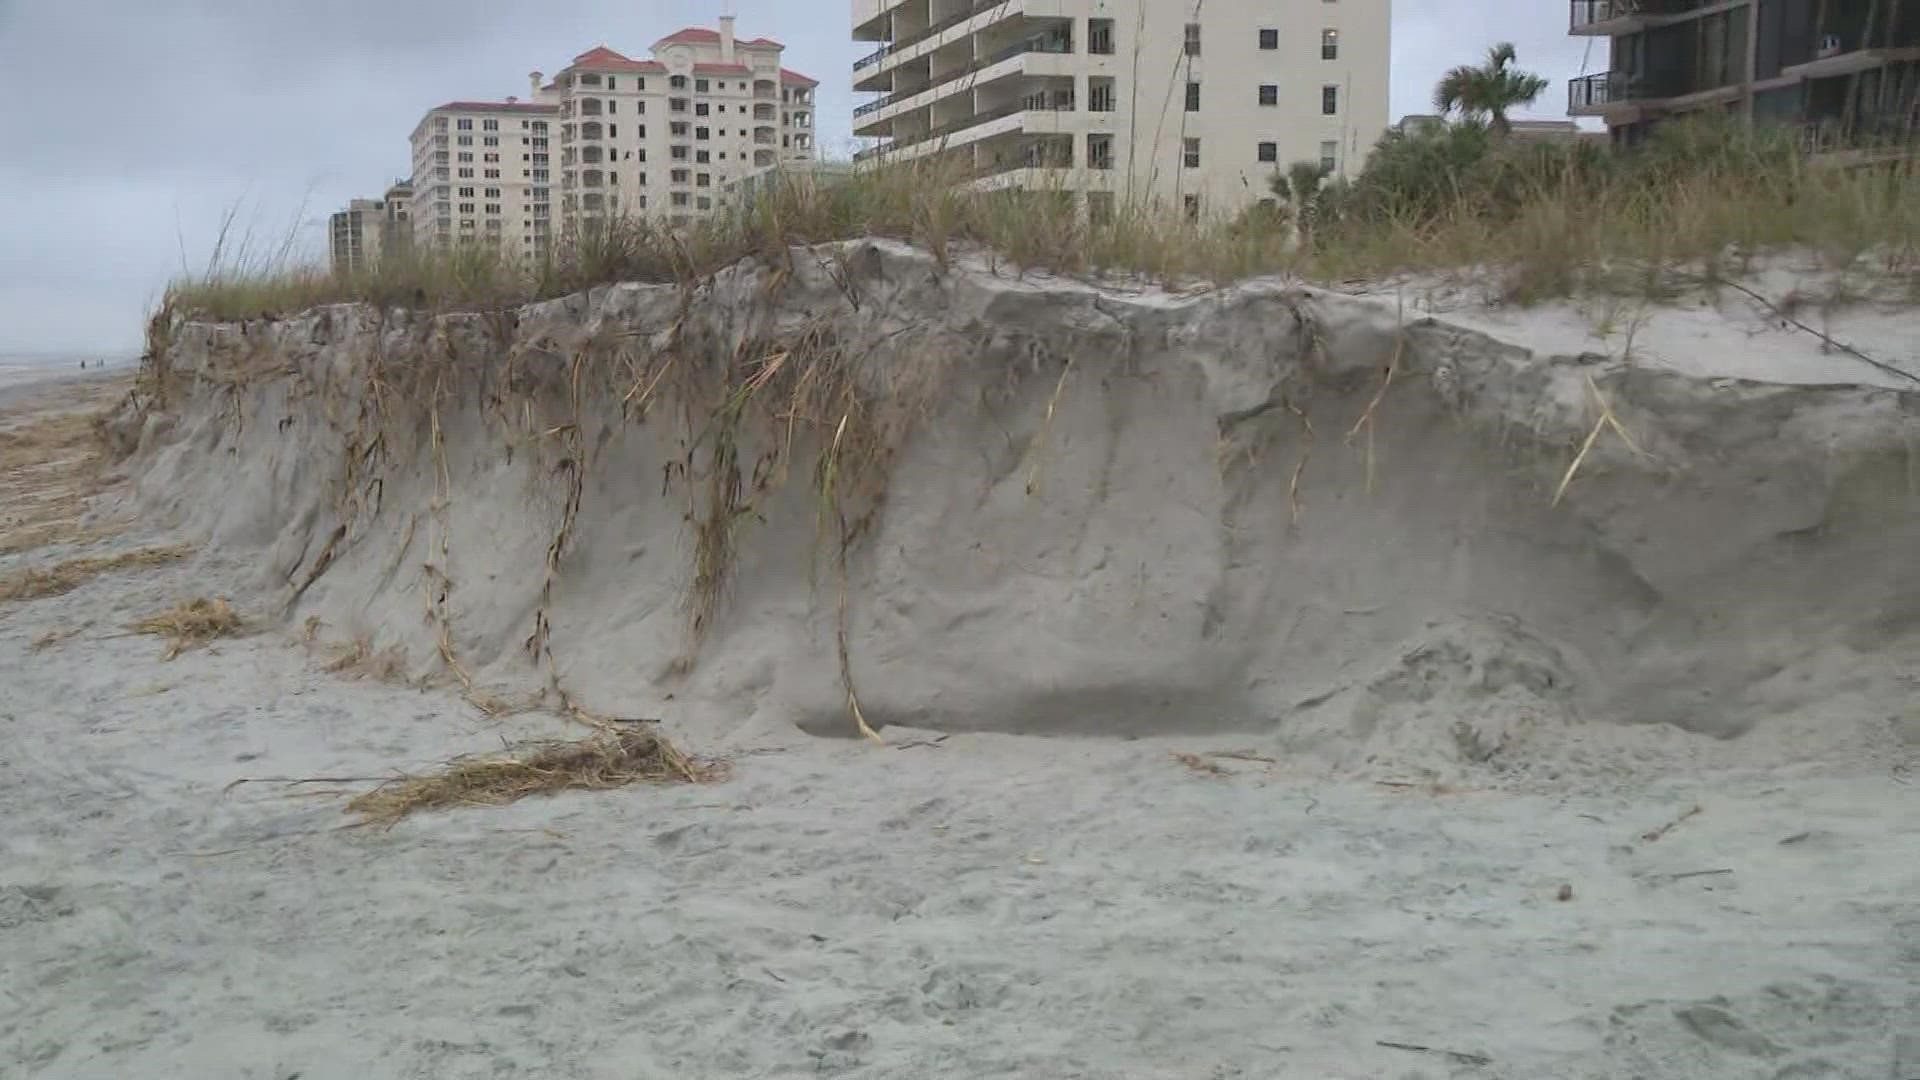 The dunes saved Jacksonville Beach from flooding during Nicole. Investing in them is an important mission.